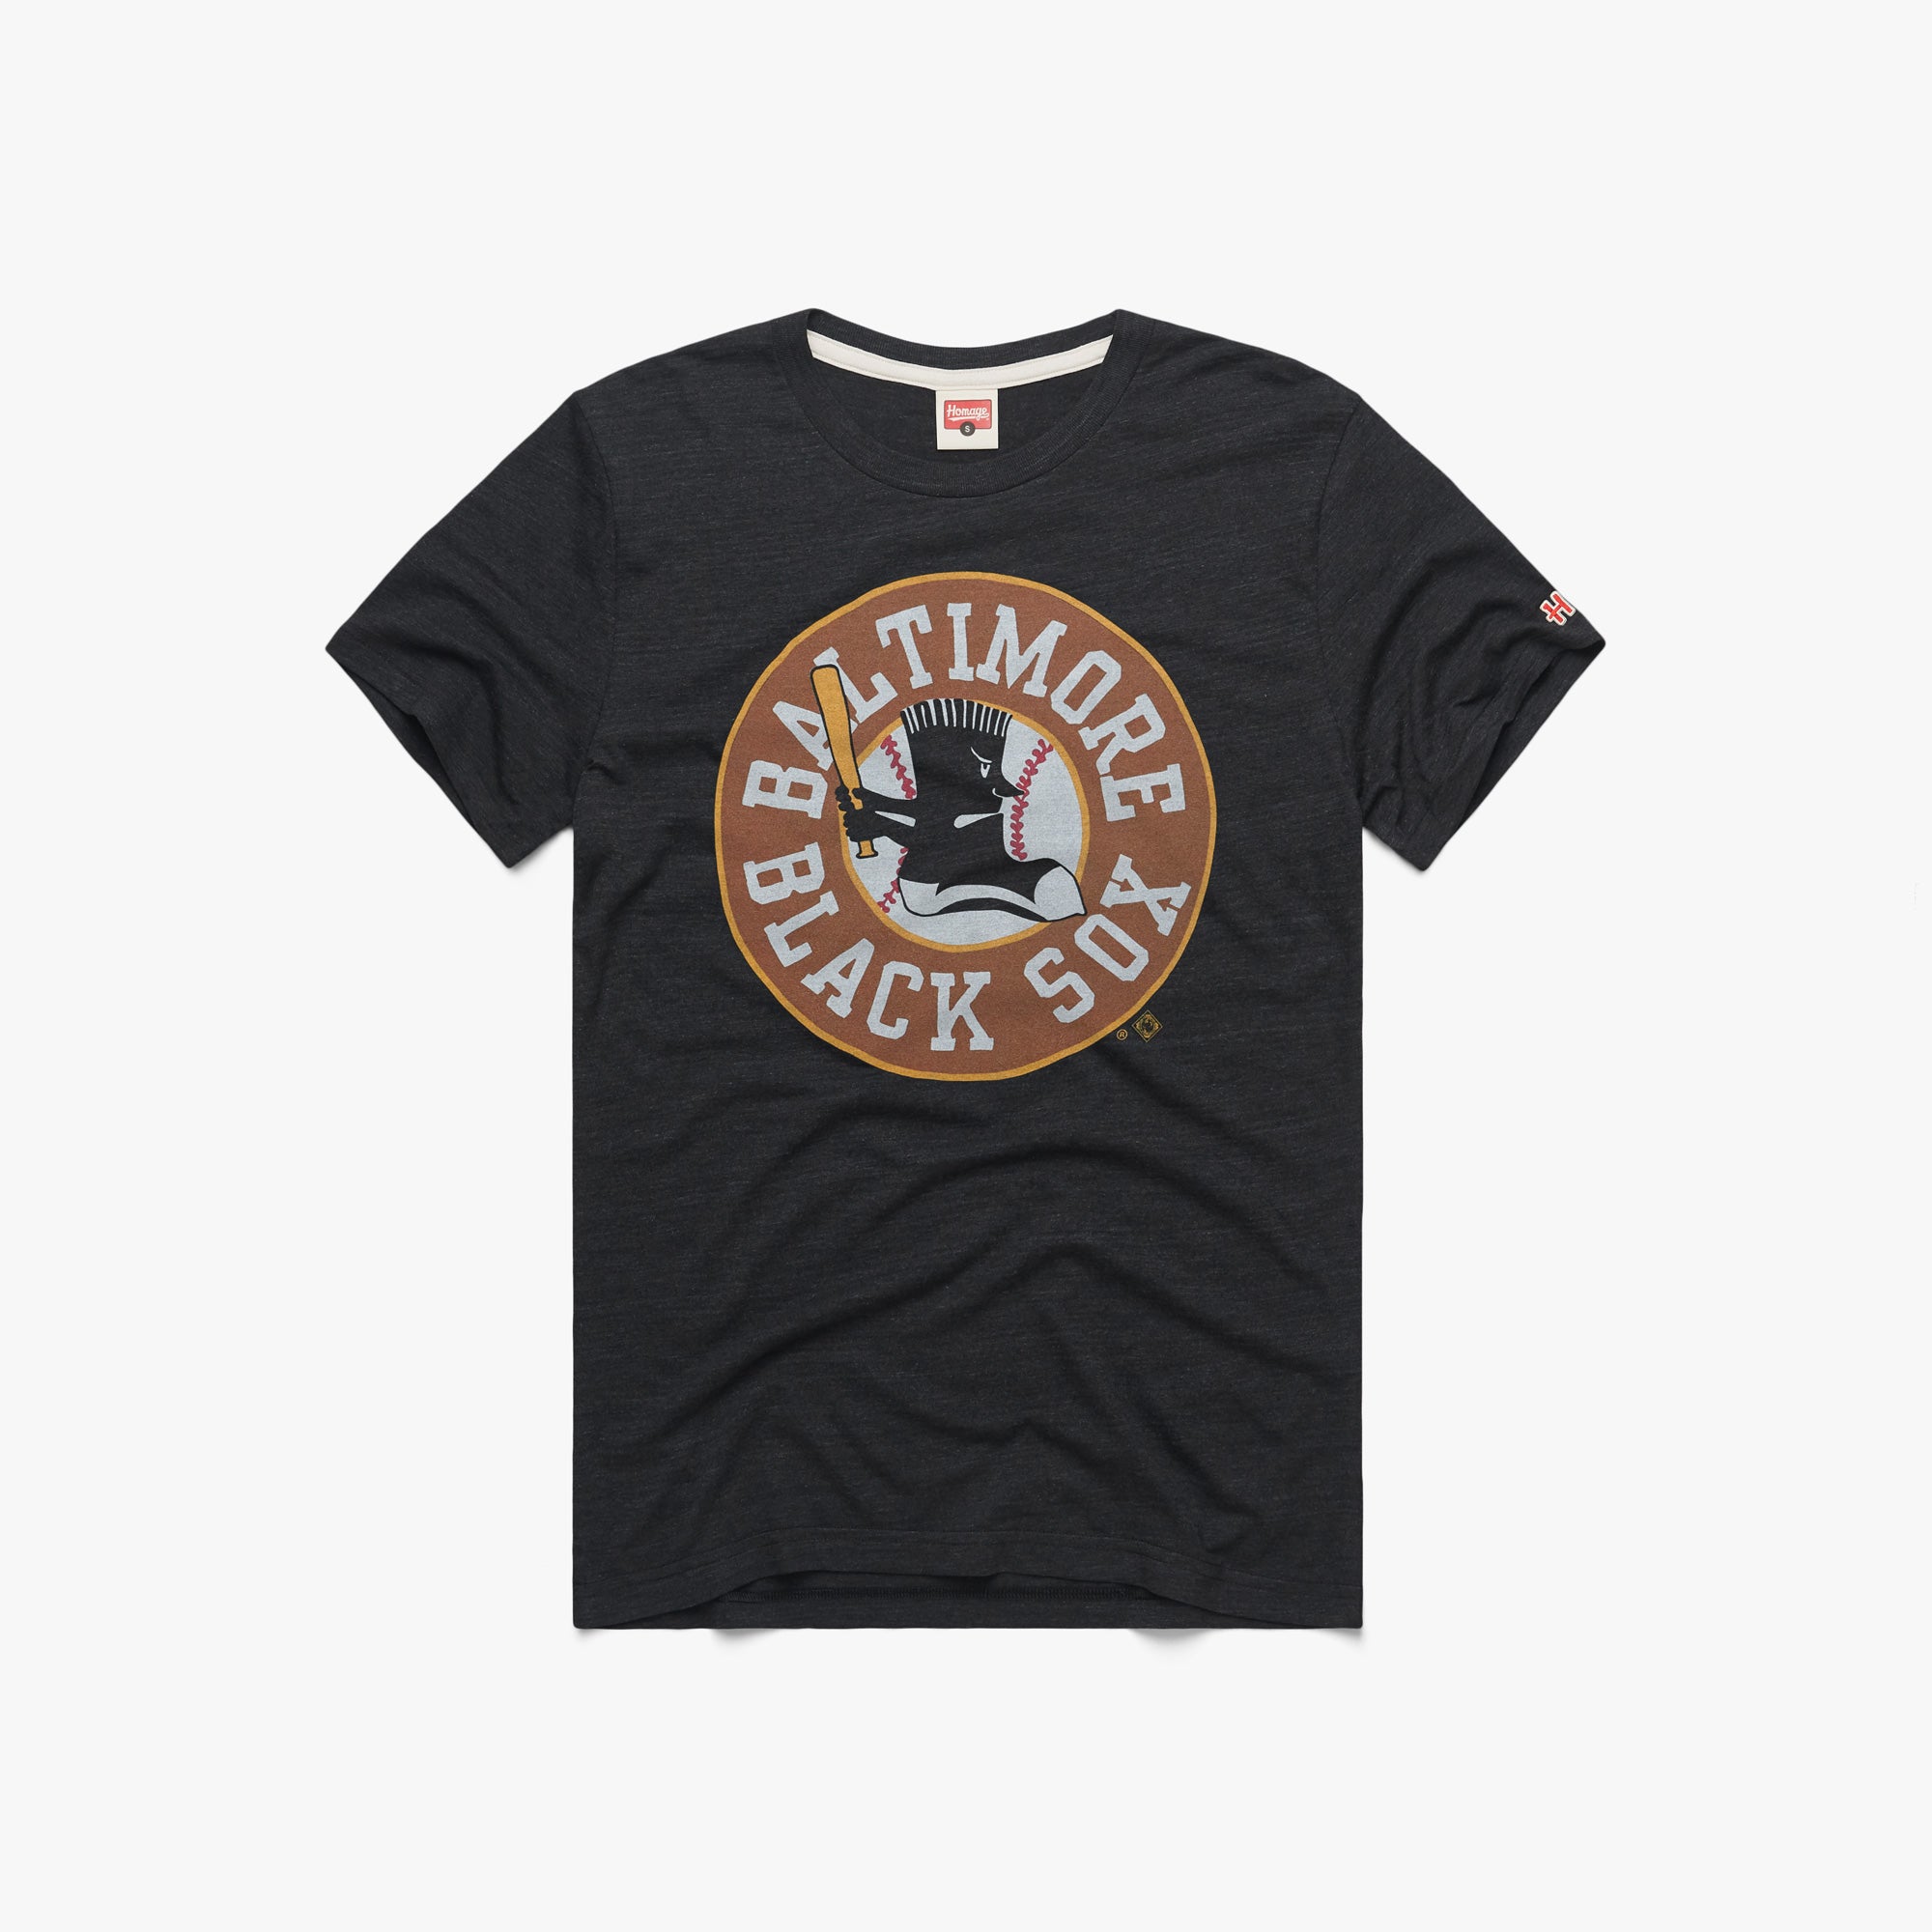 Baltimore Black Sox T-Shirt from Homage. | Charcoal | Vintage Apparel from Homage.